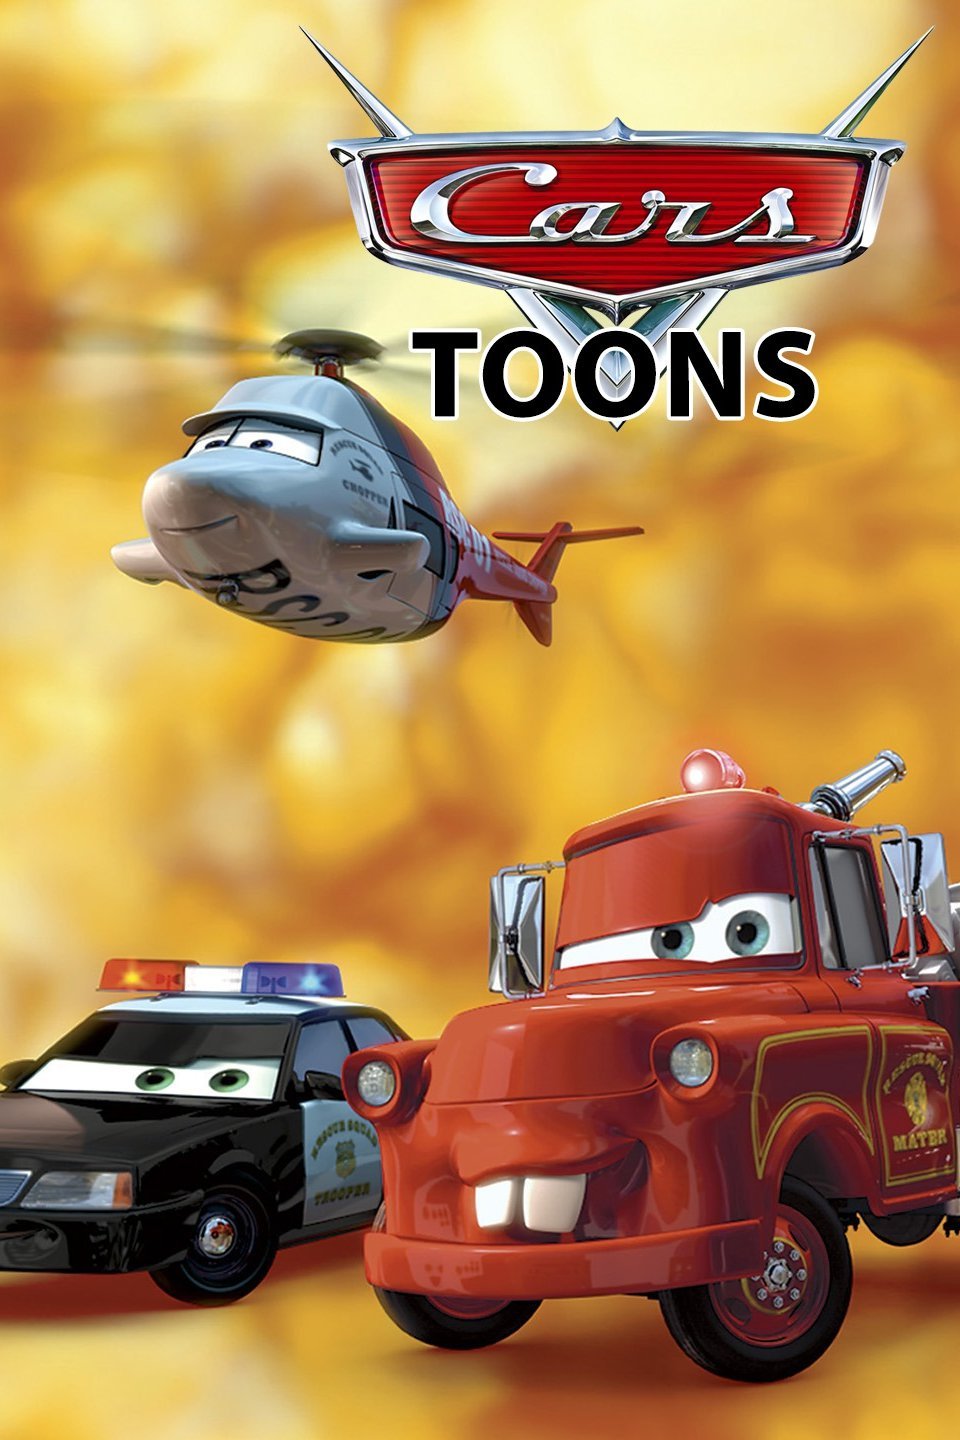 Cars Toons | Soundeffects Wiki | Fandom